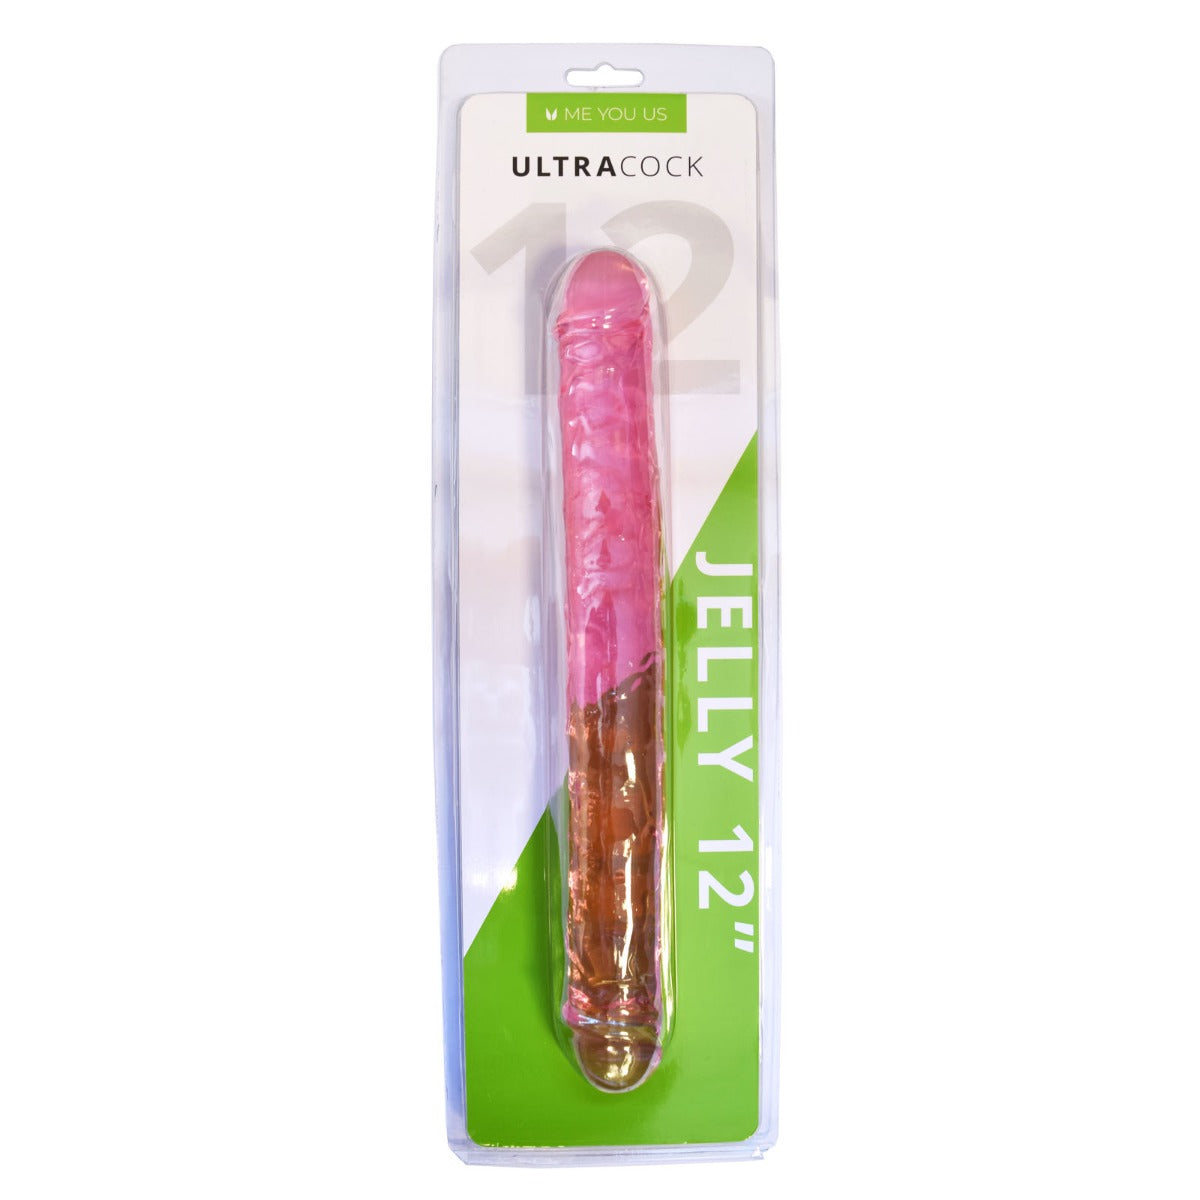  12" Ultra Cock | Me You Us  Pink Jelly Double Ended Dildo    | Awaken My Sexuality